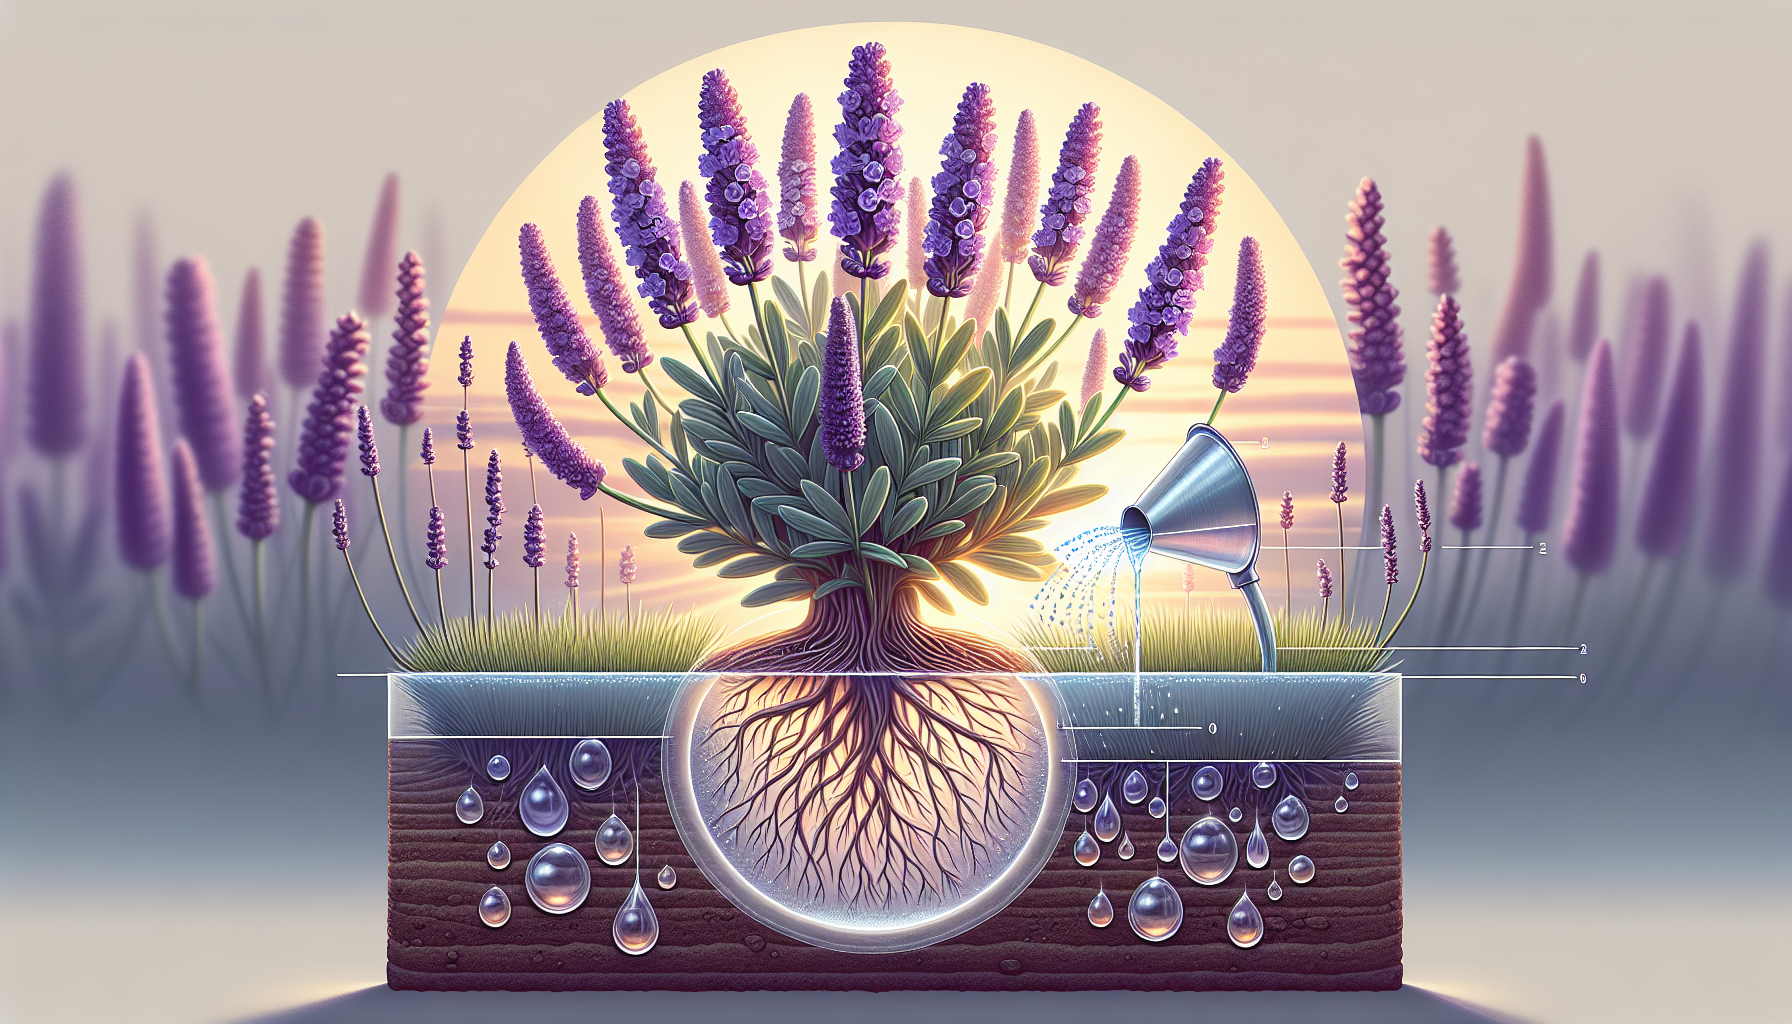 Illustration of proper watering techniques for lavender